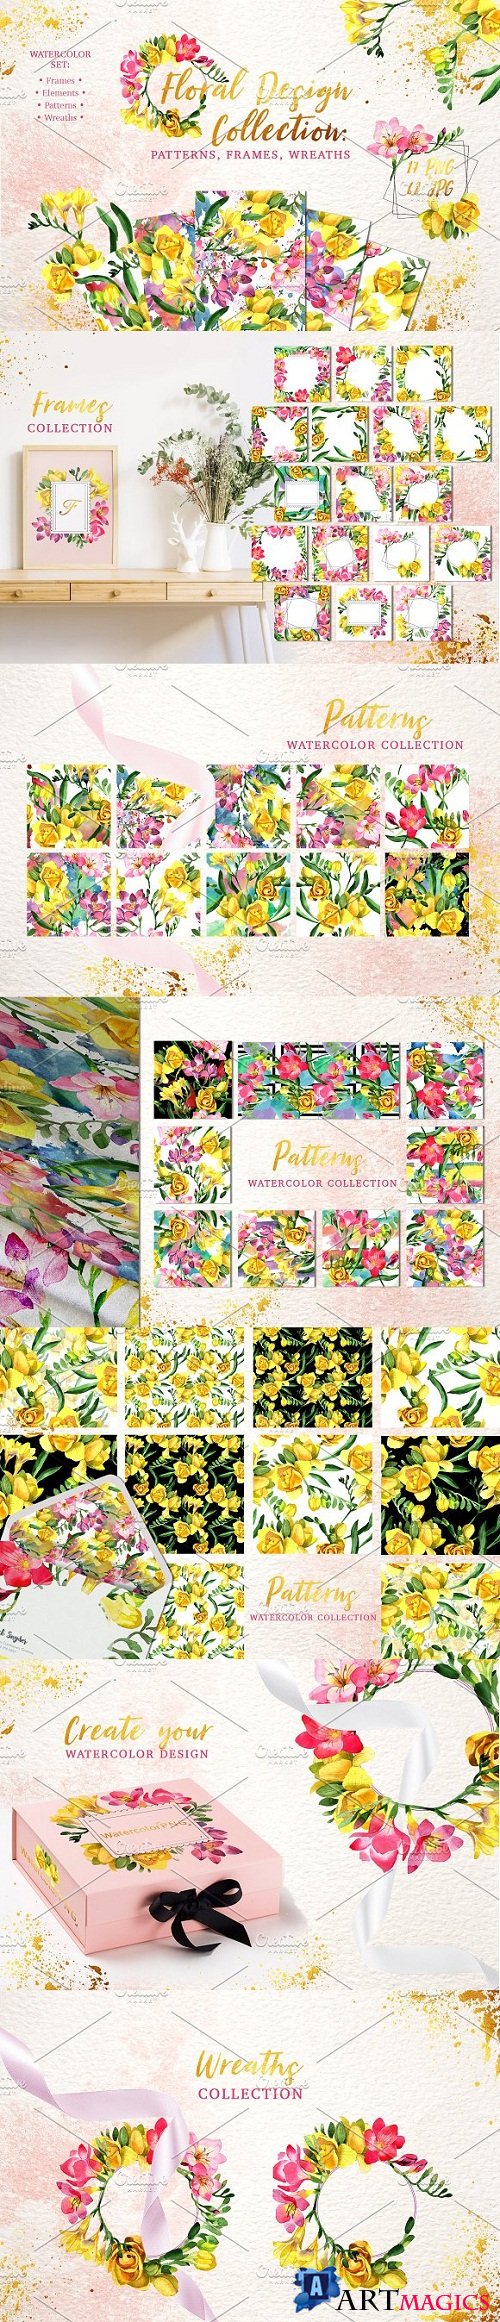 Floral Design collection watercolor - 3494854